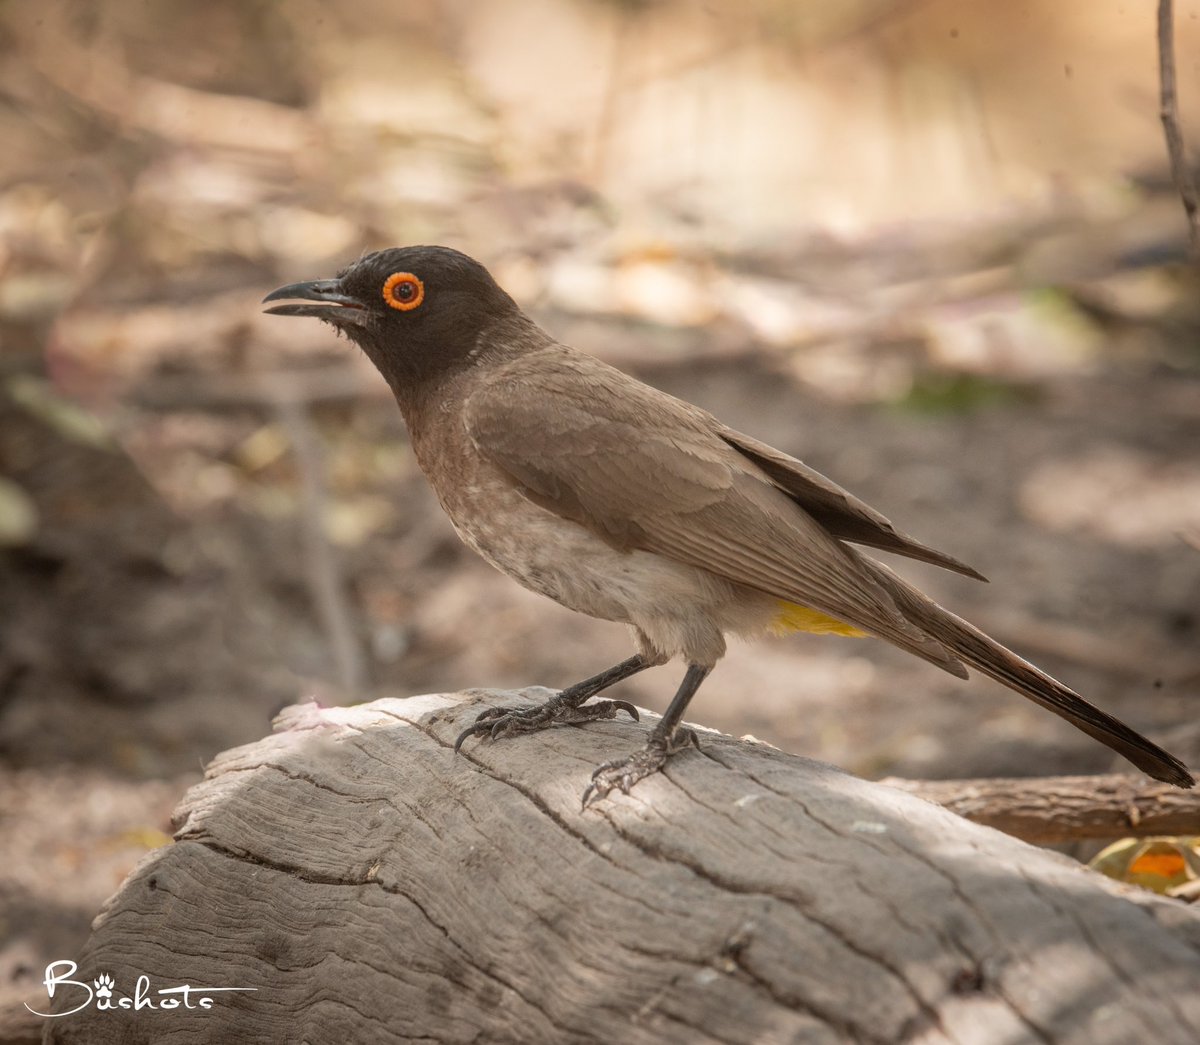 Through the thorny woodlands of the Okavango Delta Islands, a typical open-country bulbul with a dark head and a conspicuous and diagnostic fleshy orange-red eye-ring popped up and guess who he was…. the Black-fronted Bulbul alias Red-eyed Bulbul. #Birds #BirdWatching #Birding